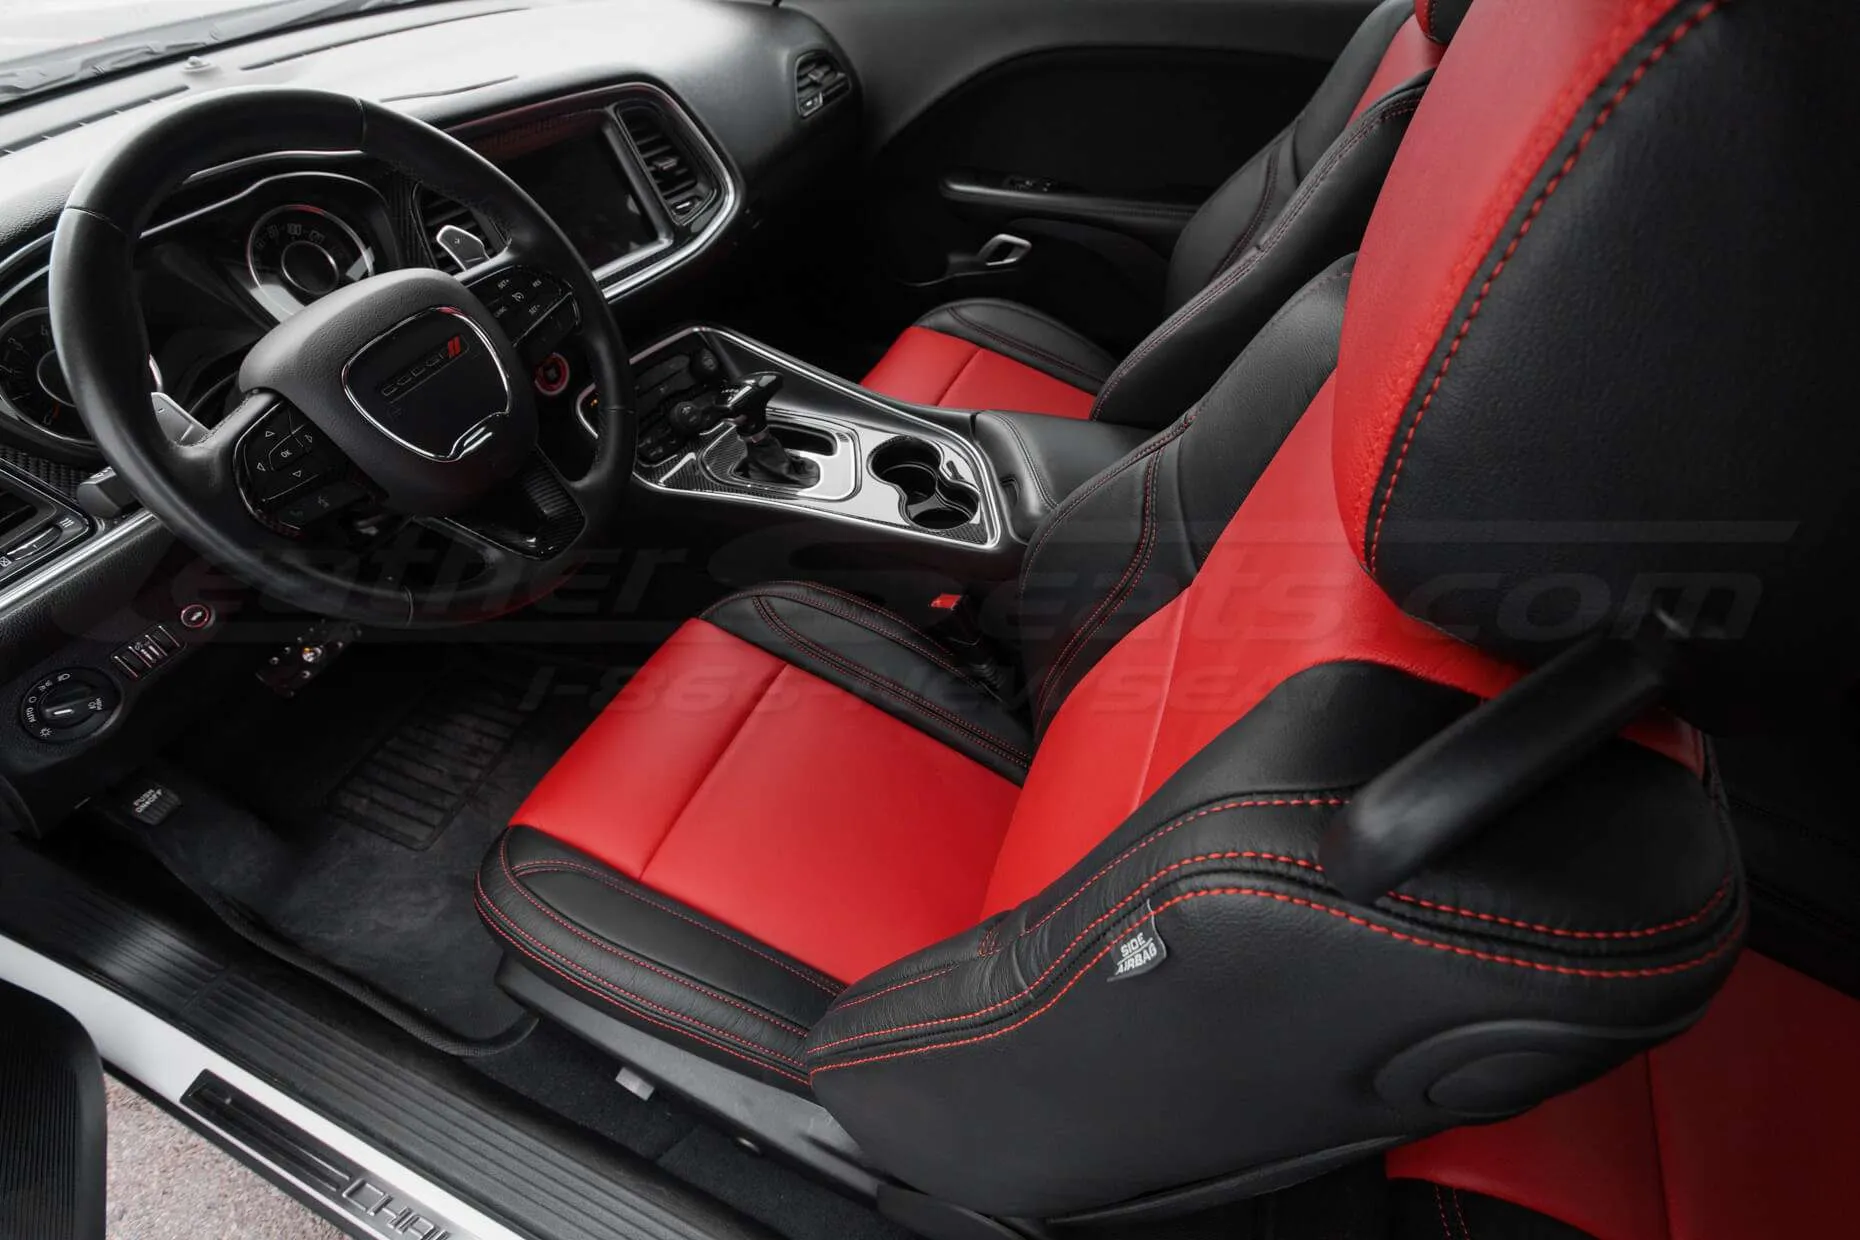 15-20 Dodge Challenger Upholstery Kit - Black & Bright Red - Installed Front driver seat - Headrest down view